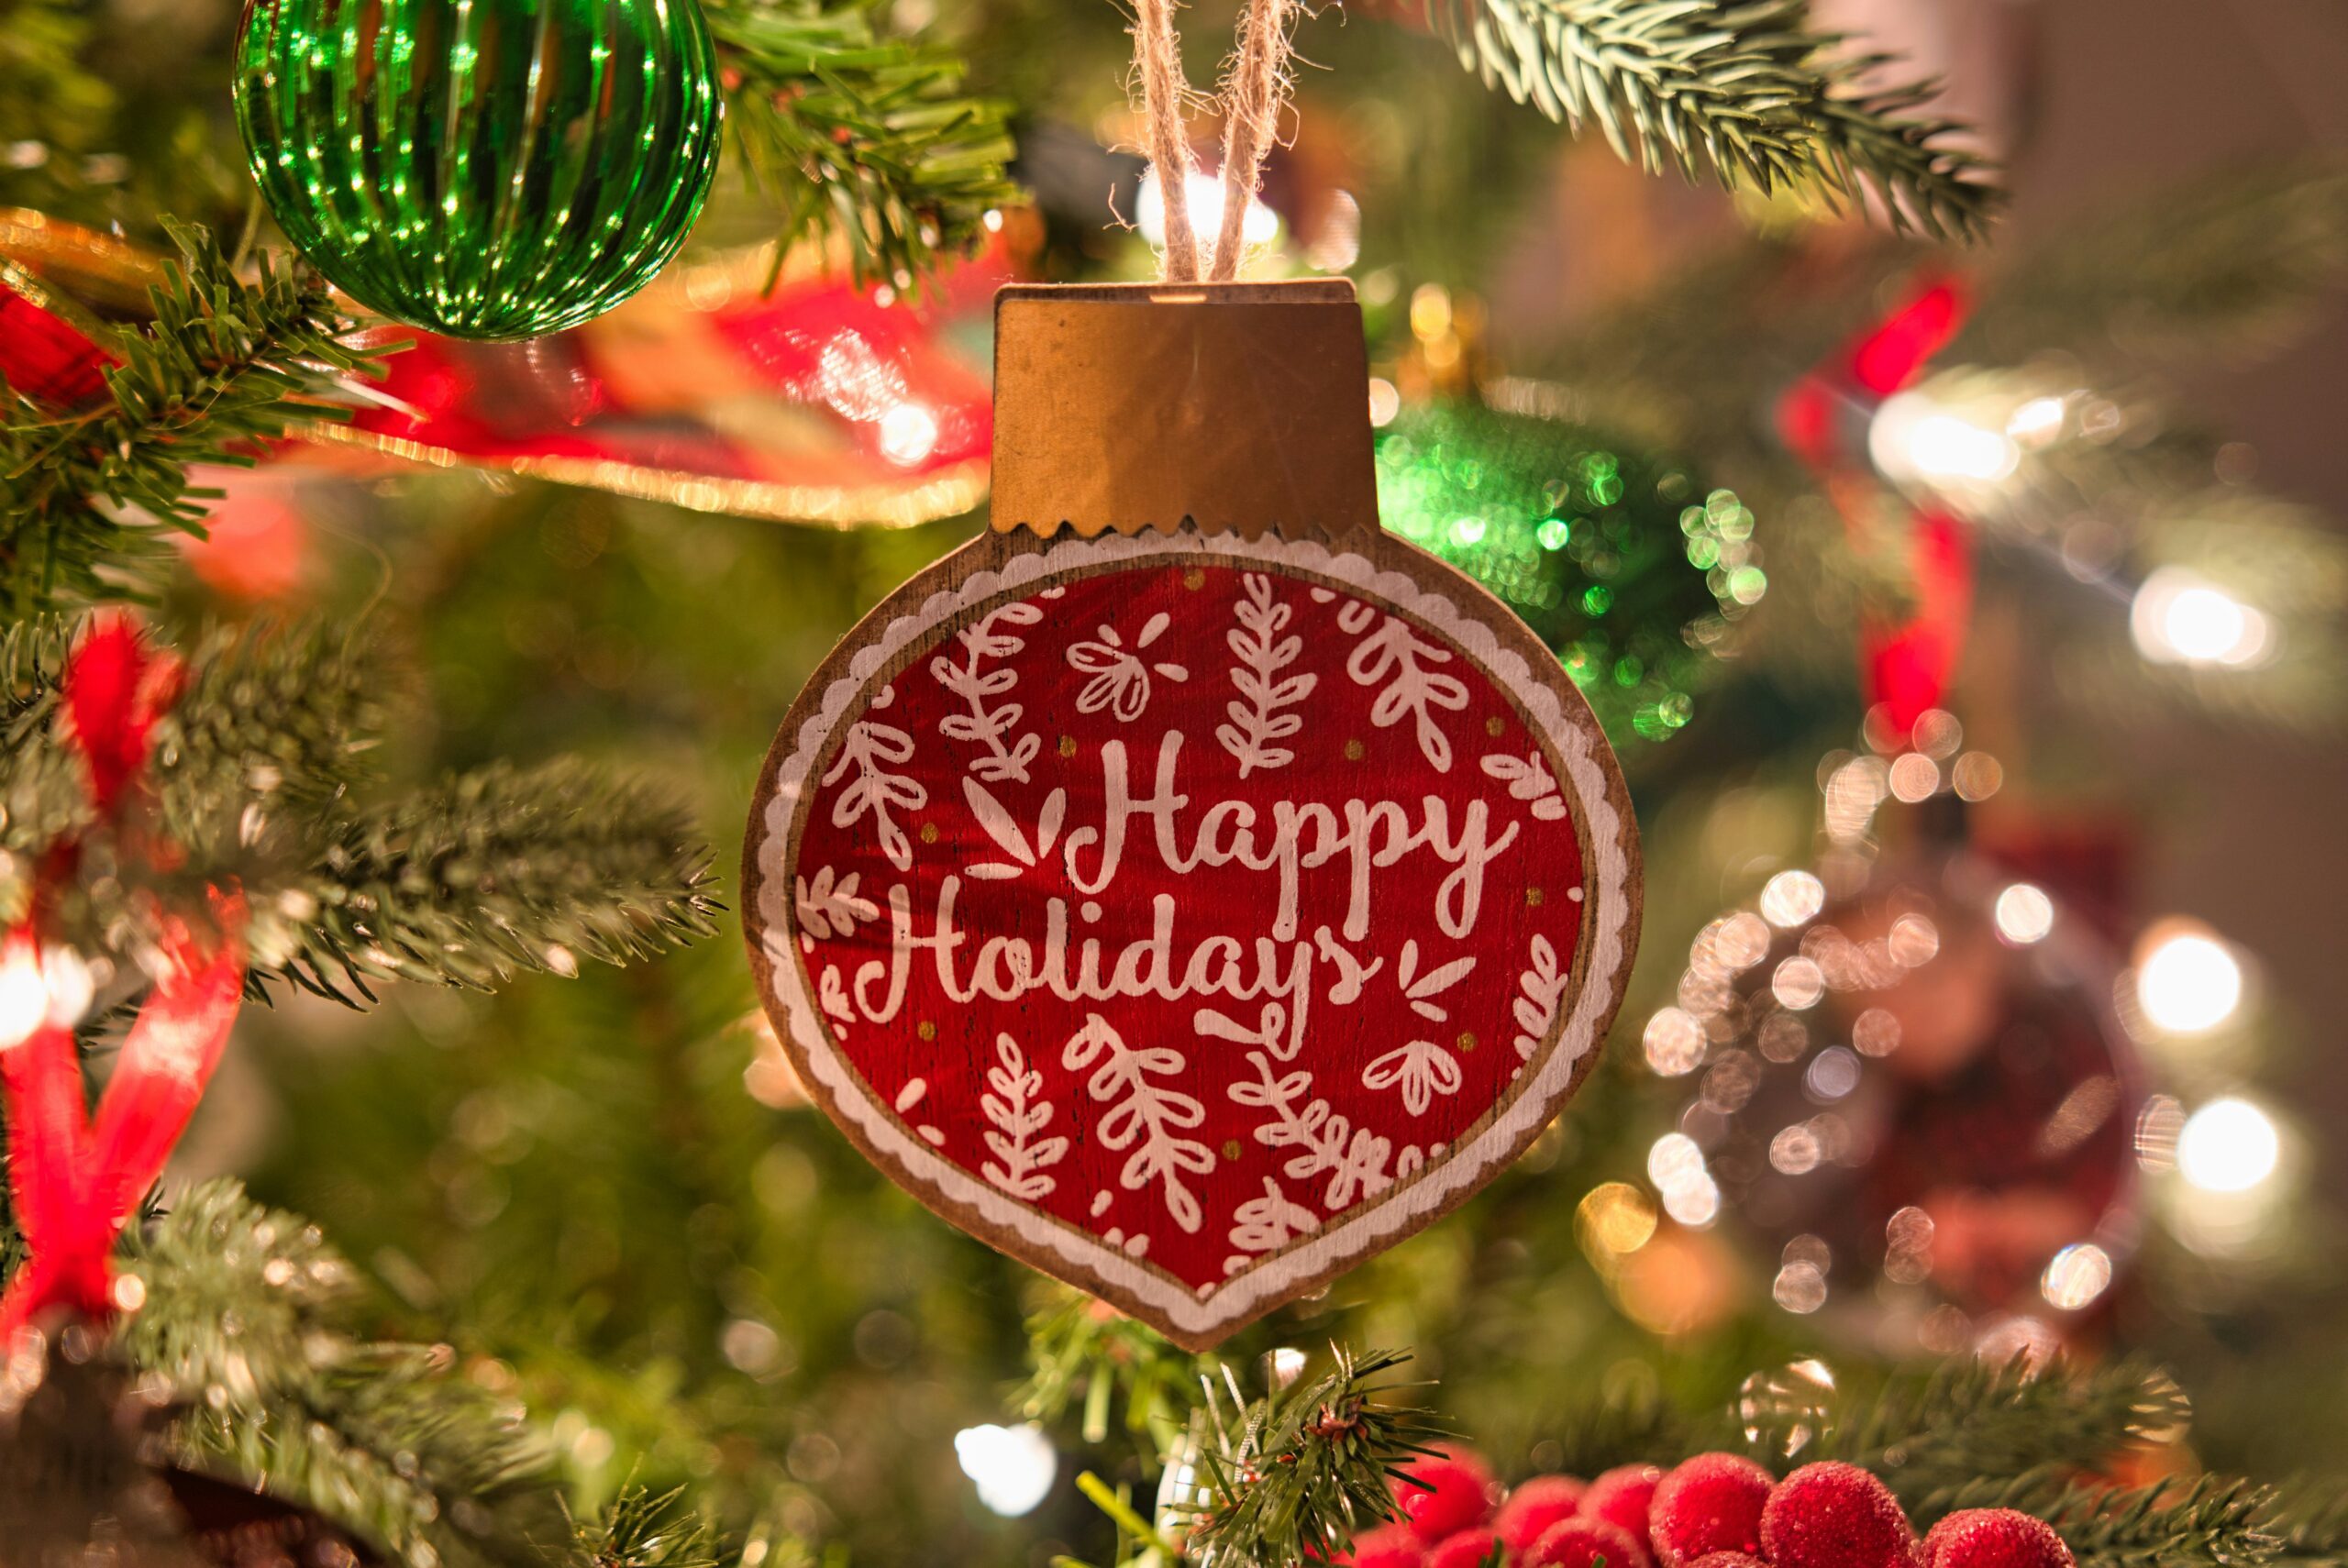 Happy Holidays and Merry Christmas! | Healthcare IT Today